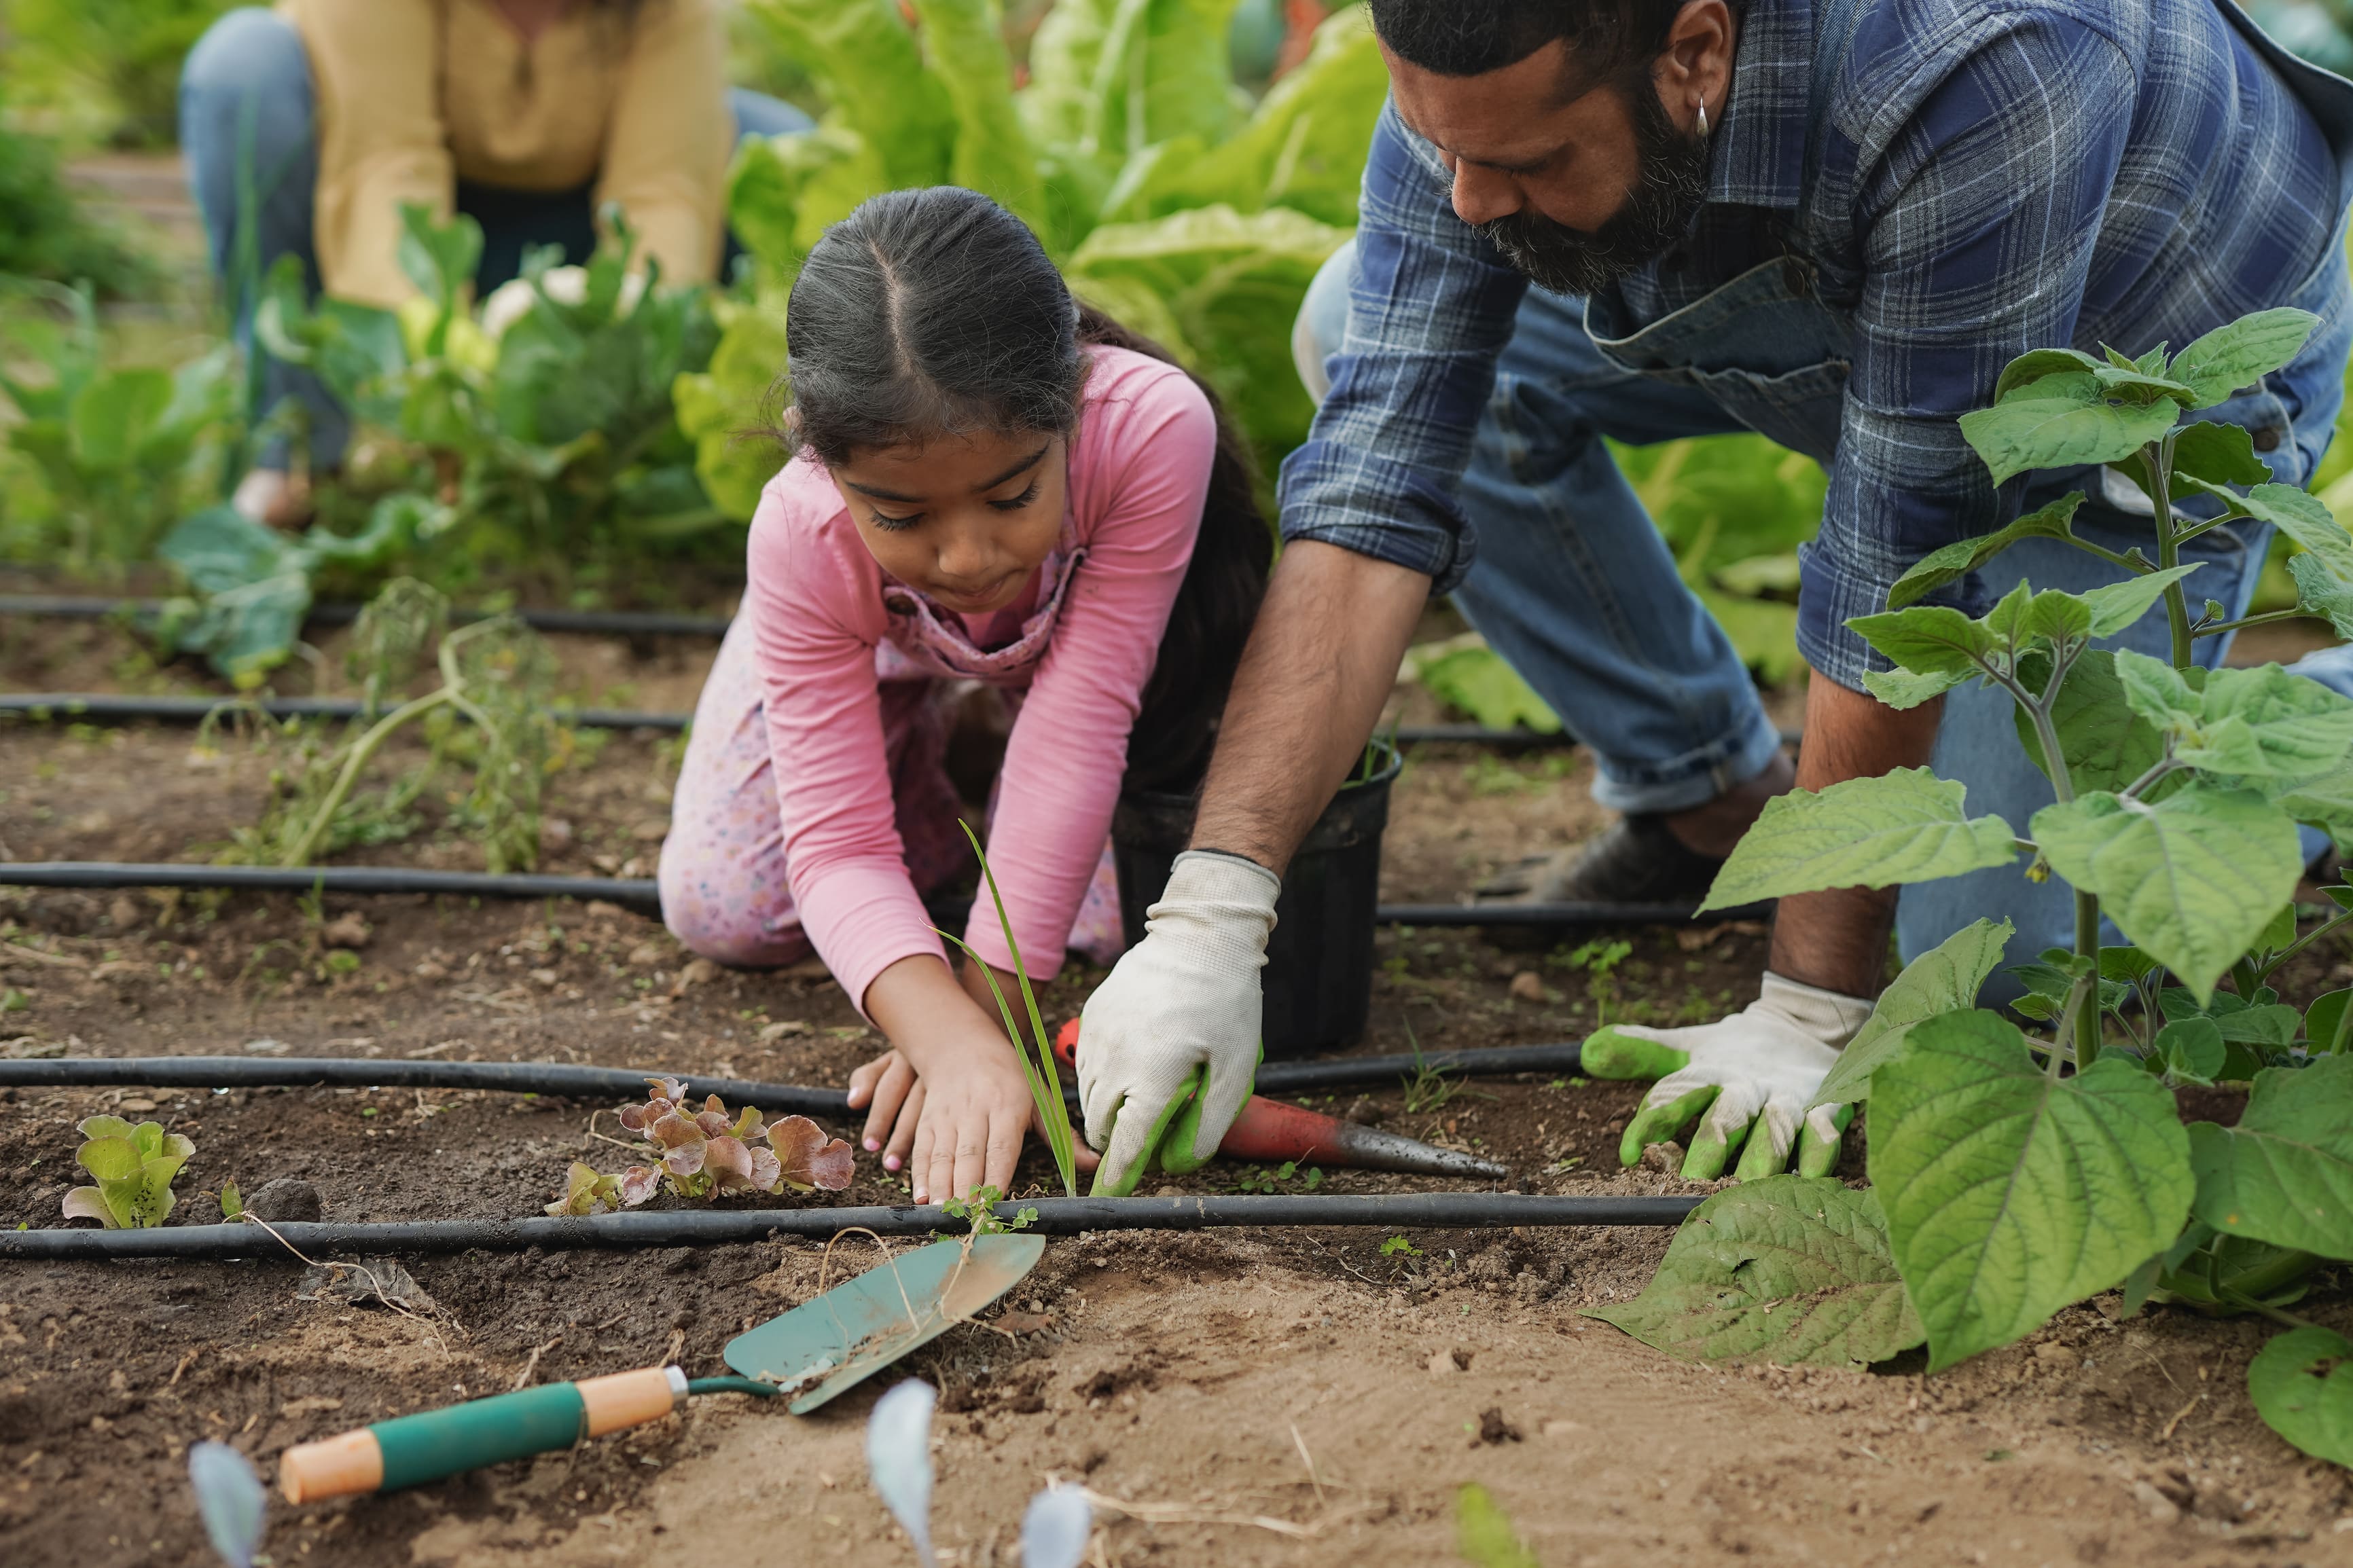 A young girl planting in the garden with her father enjoying gardening activities for children.